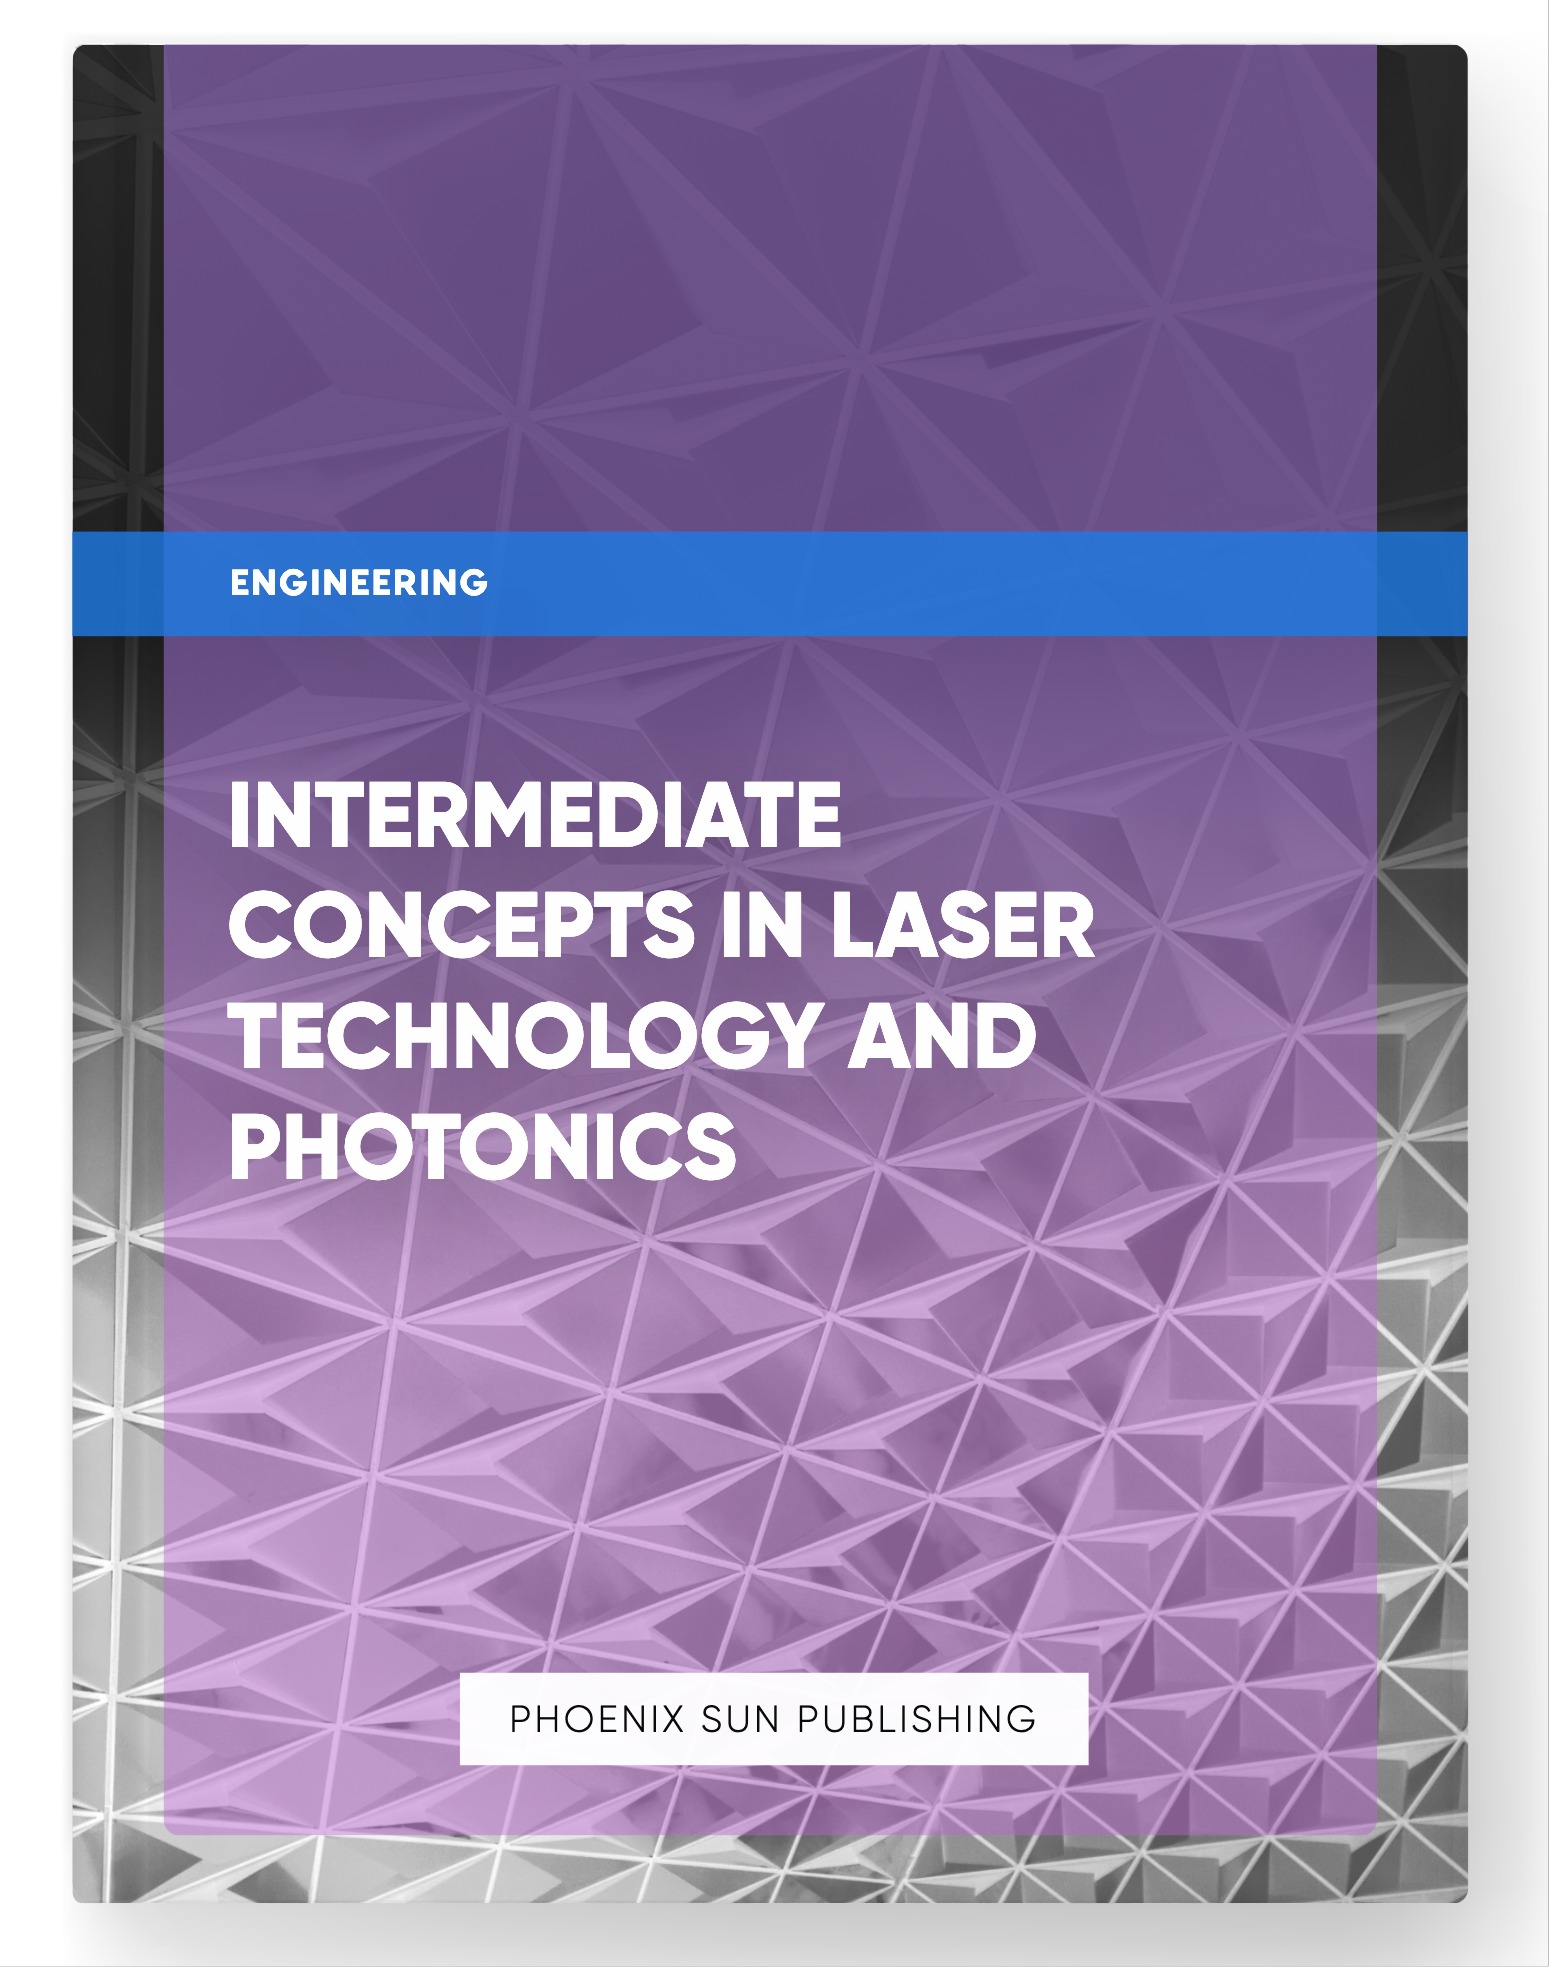 Intermediate Concepts in Laser Technology and Photonics